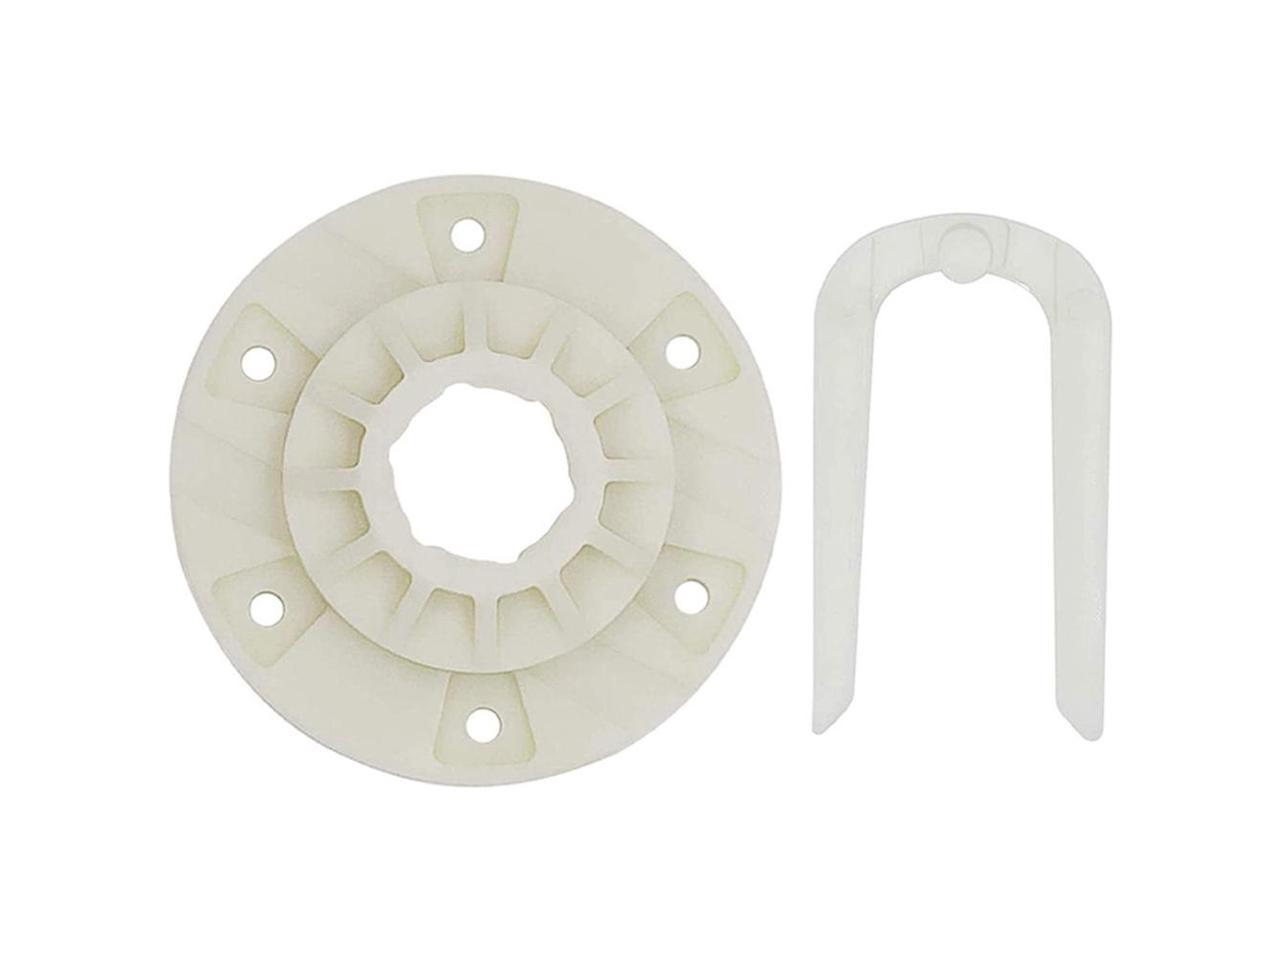 Details about   Basket Driven Hub Kit ykz-W10528947 for Whirlpool Kenmore W10396887 AP5665171 